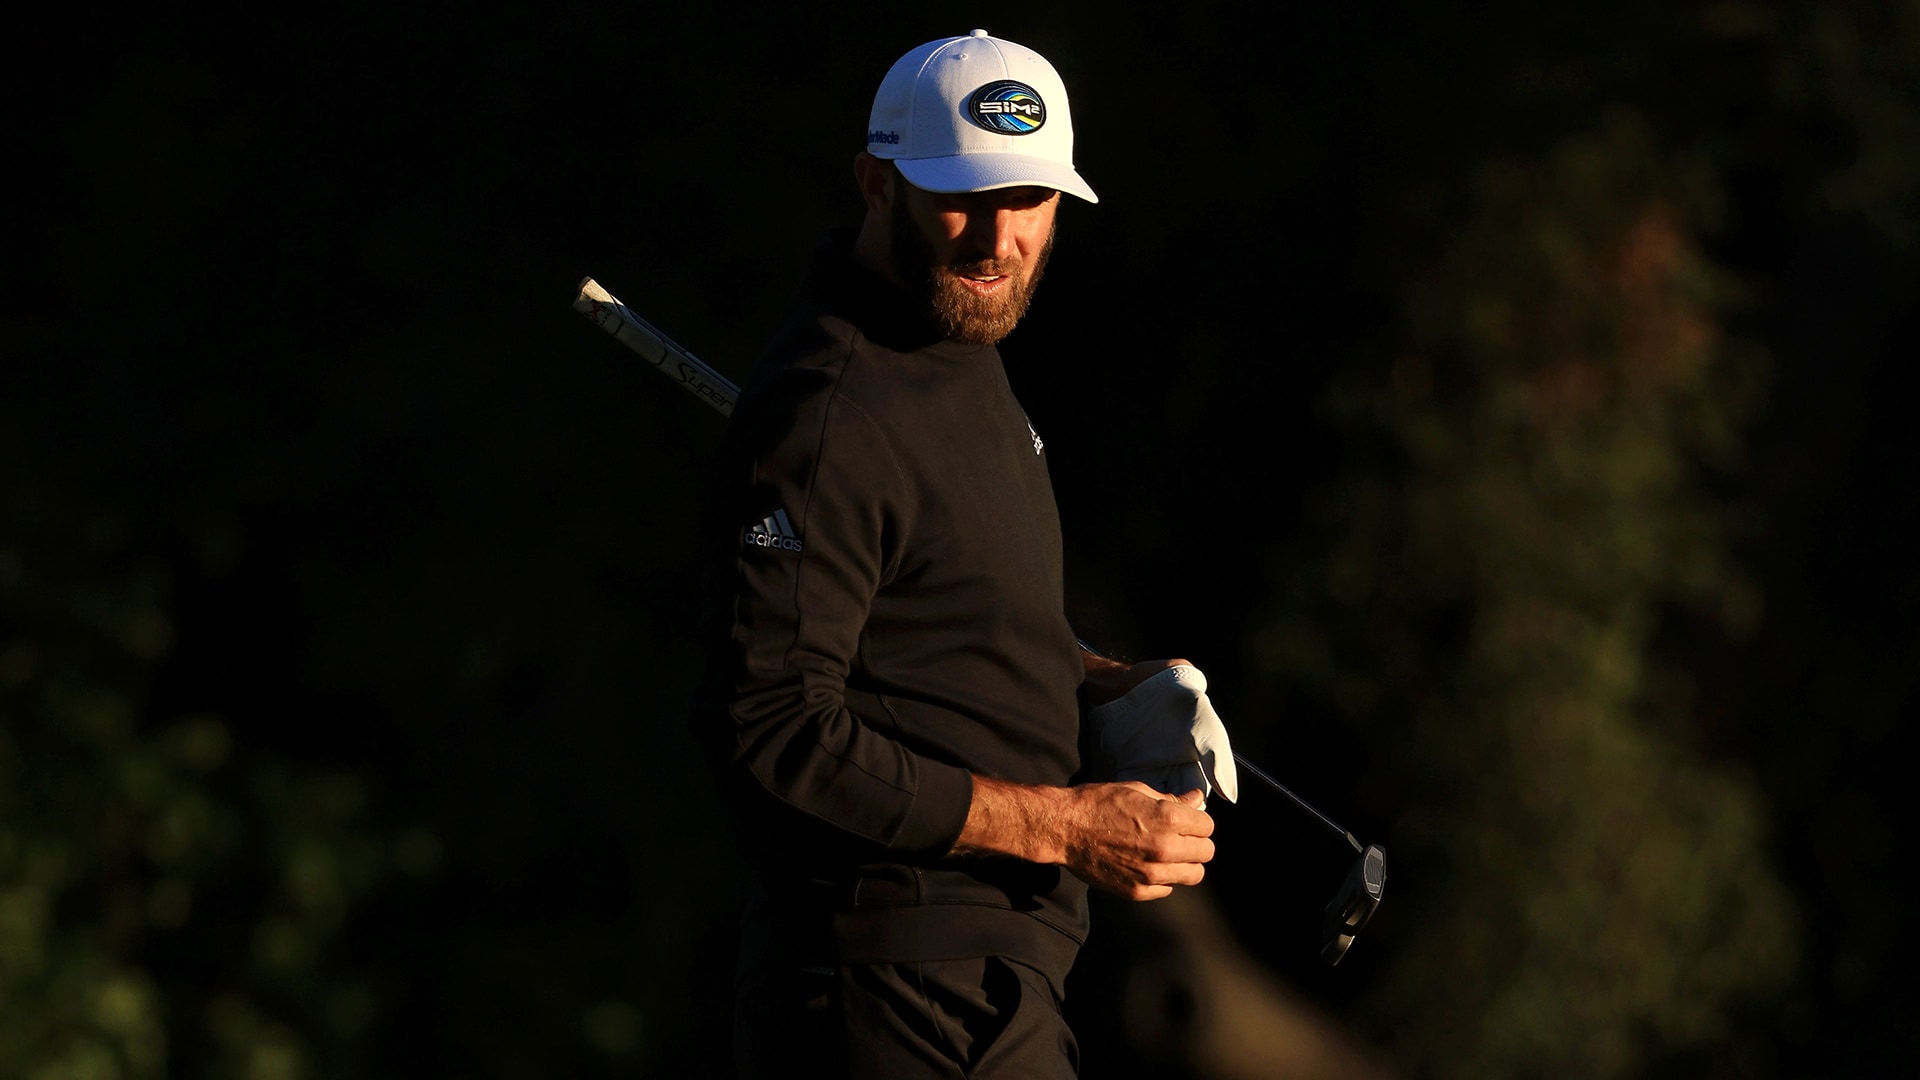 Dustin Johnson leads WGC field into Concession as betting favorite